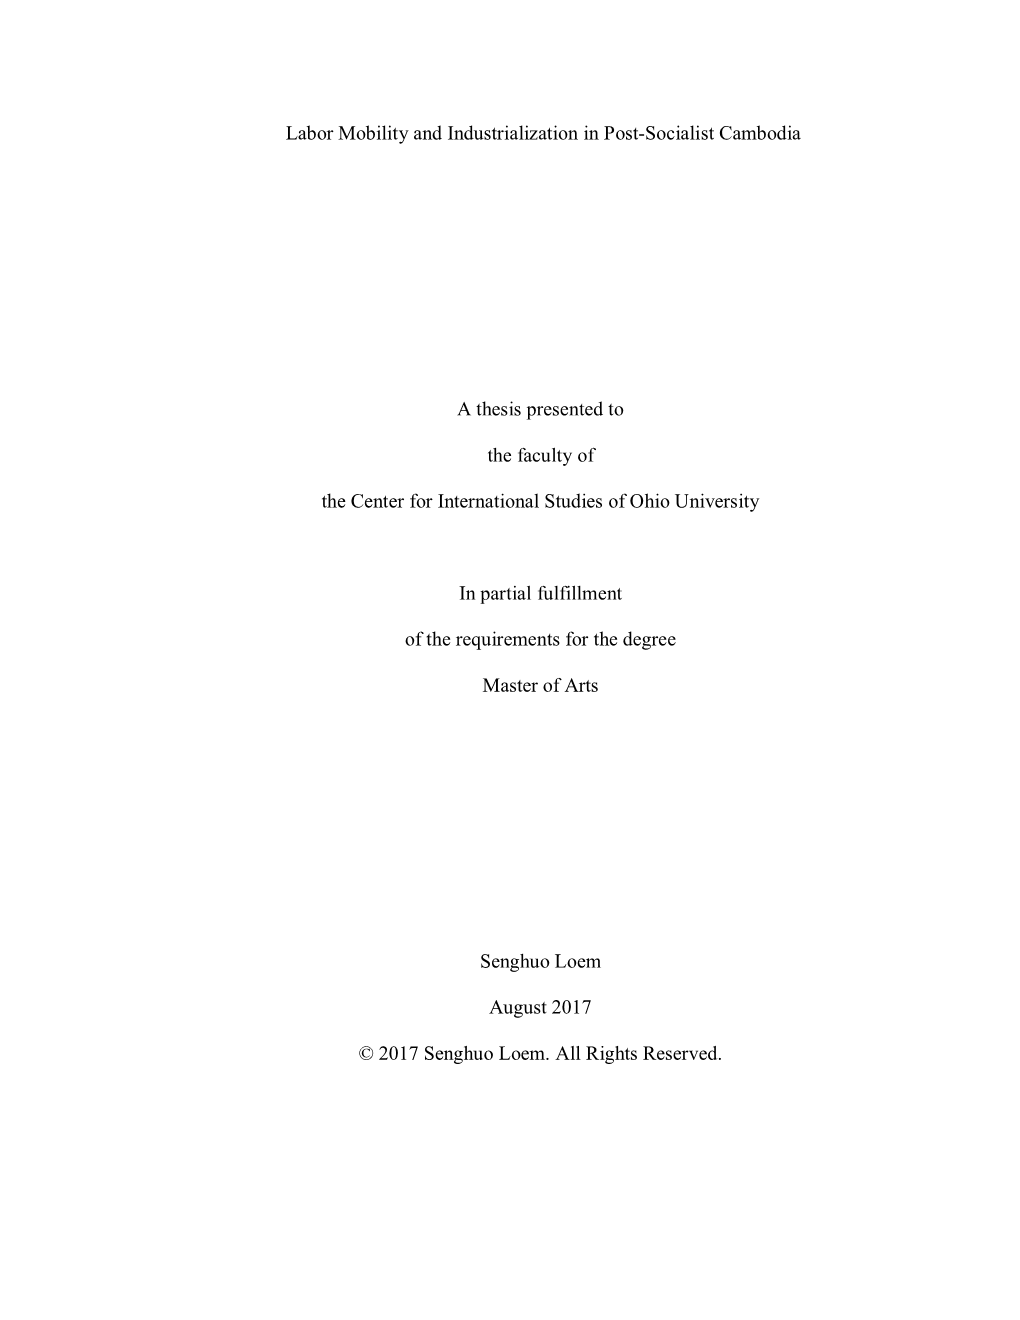 Labor Mobility and Industrialization in Post-Socialist Cambodia a Thesis